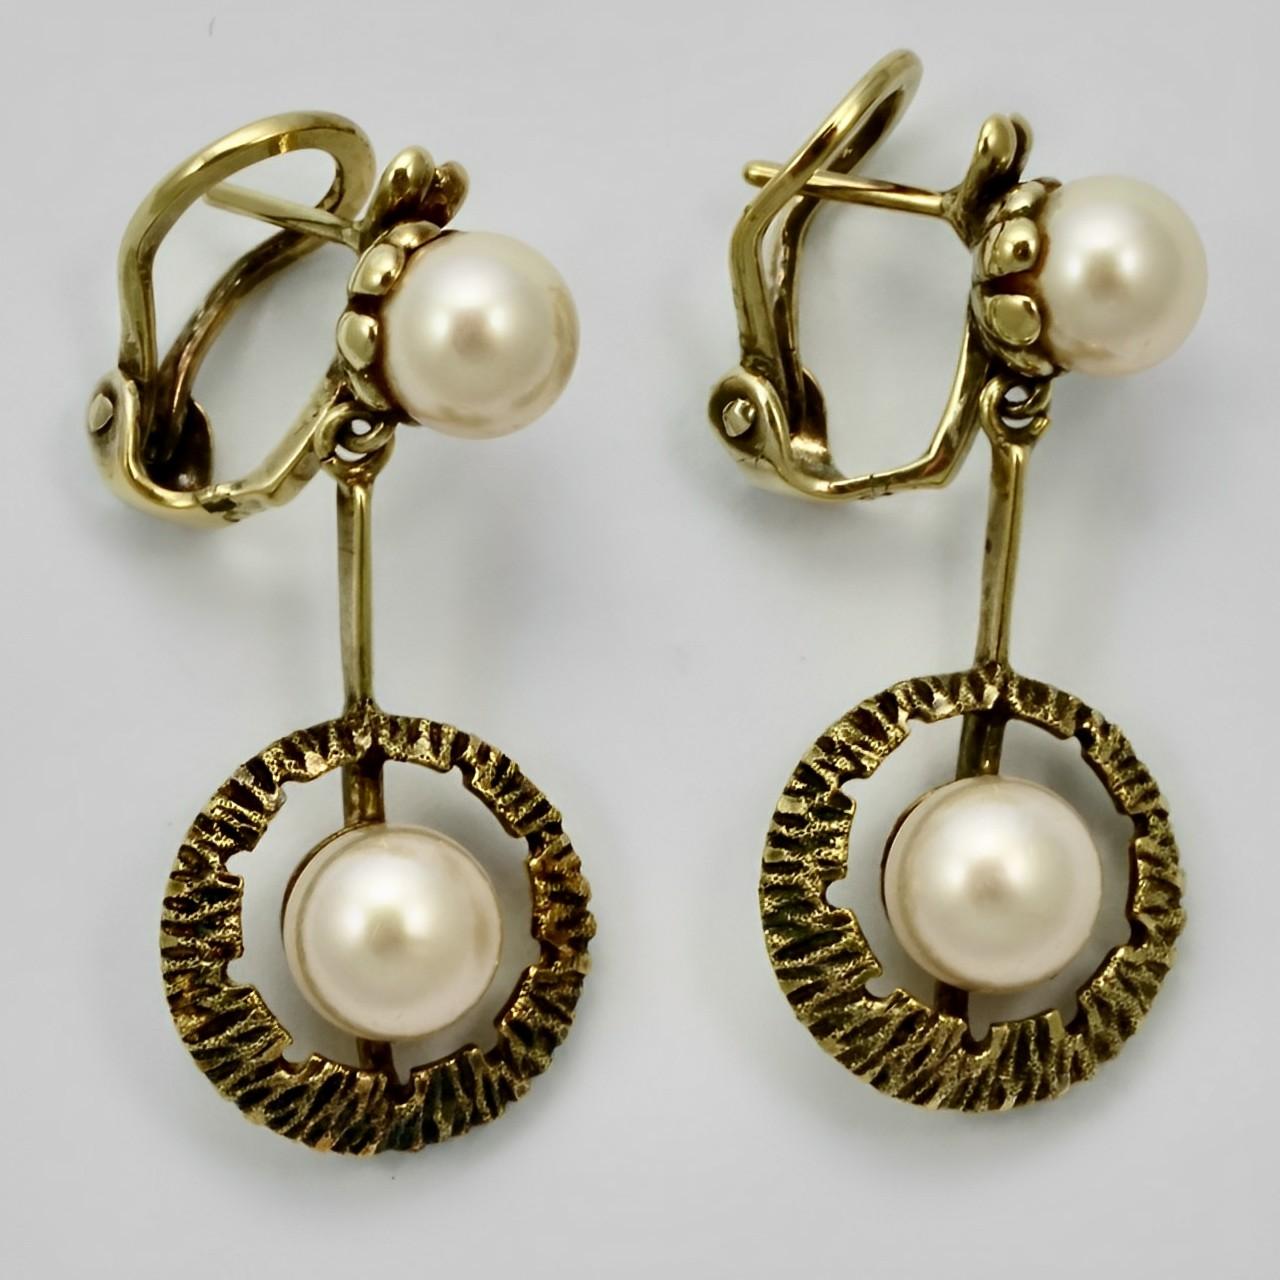 Beautiful 18K gold drop earrings with a pair of cultured pearls on each earring. The drop pearl is encircled with an enamelled bark design. The earrings test as 18K gold. Measuring length 3.6 cm / 1.4 inches, and the diameter of the drop is 1.55 cm